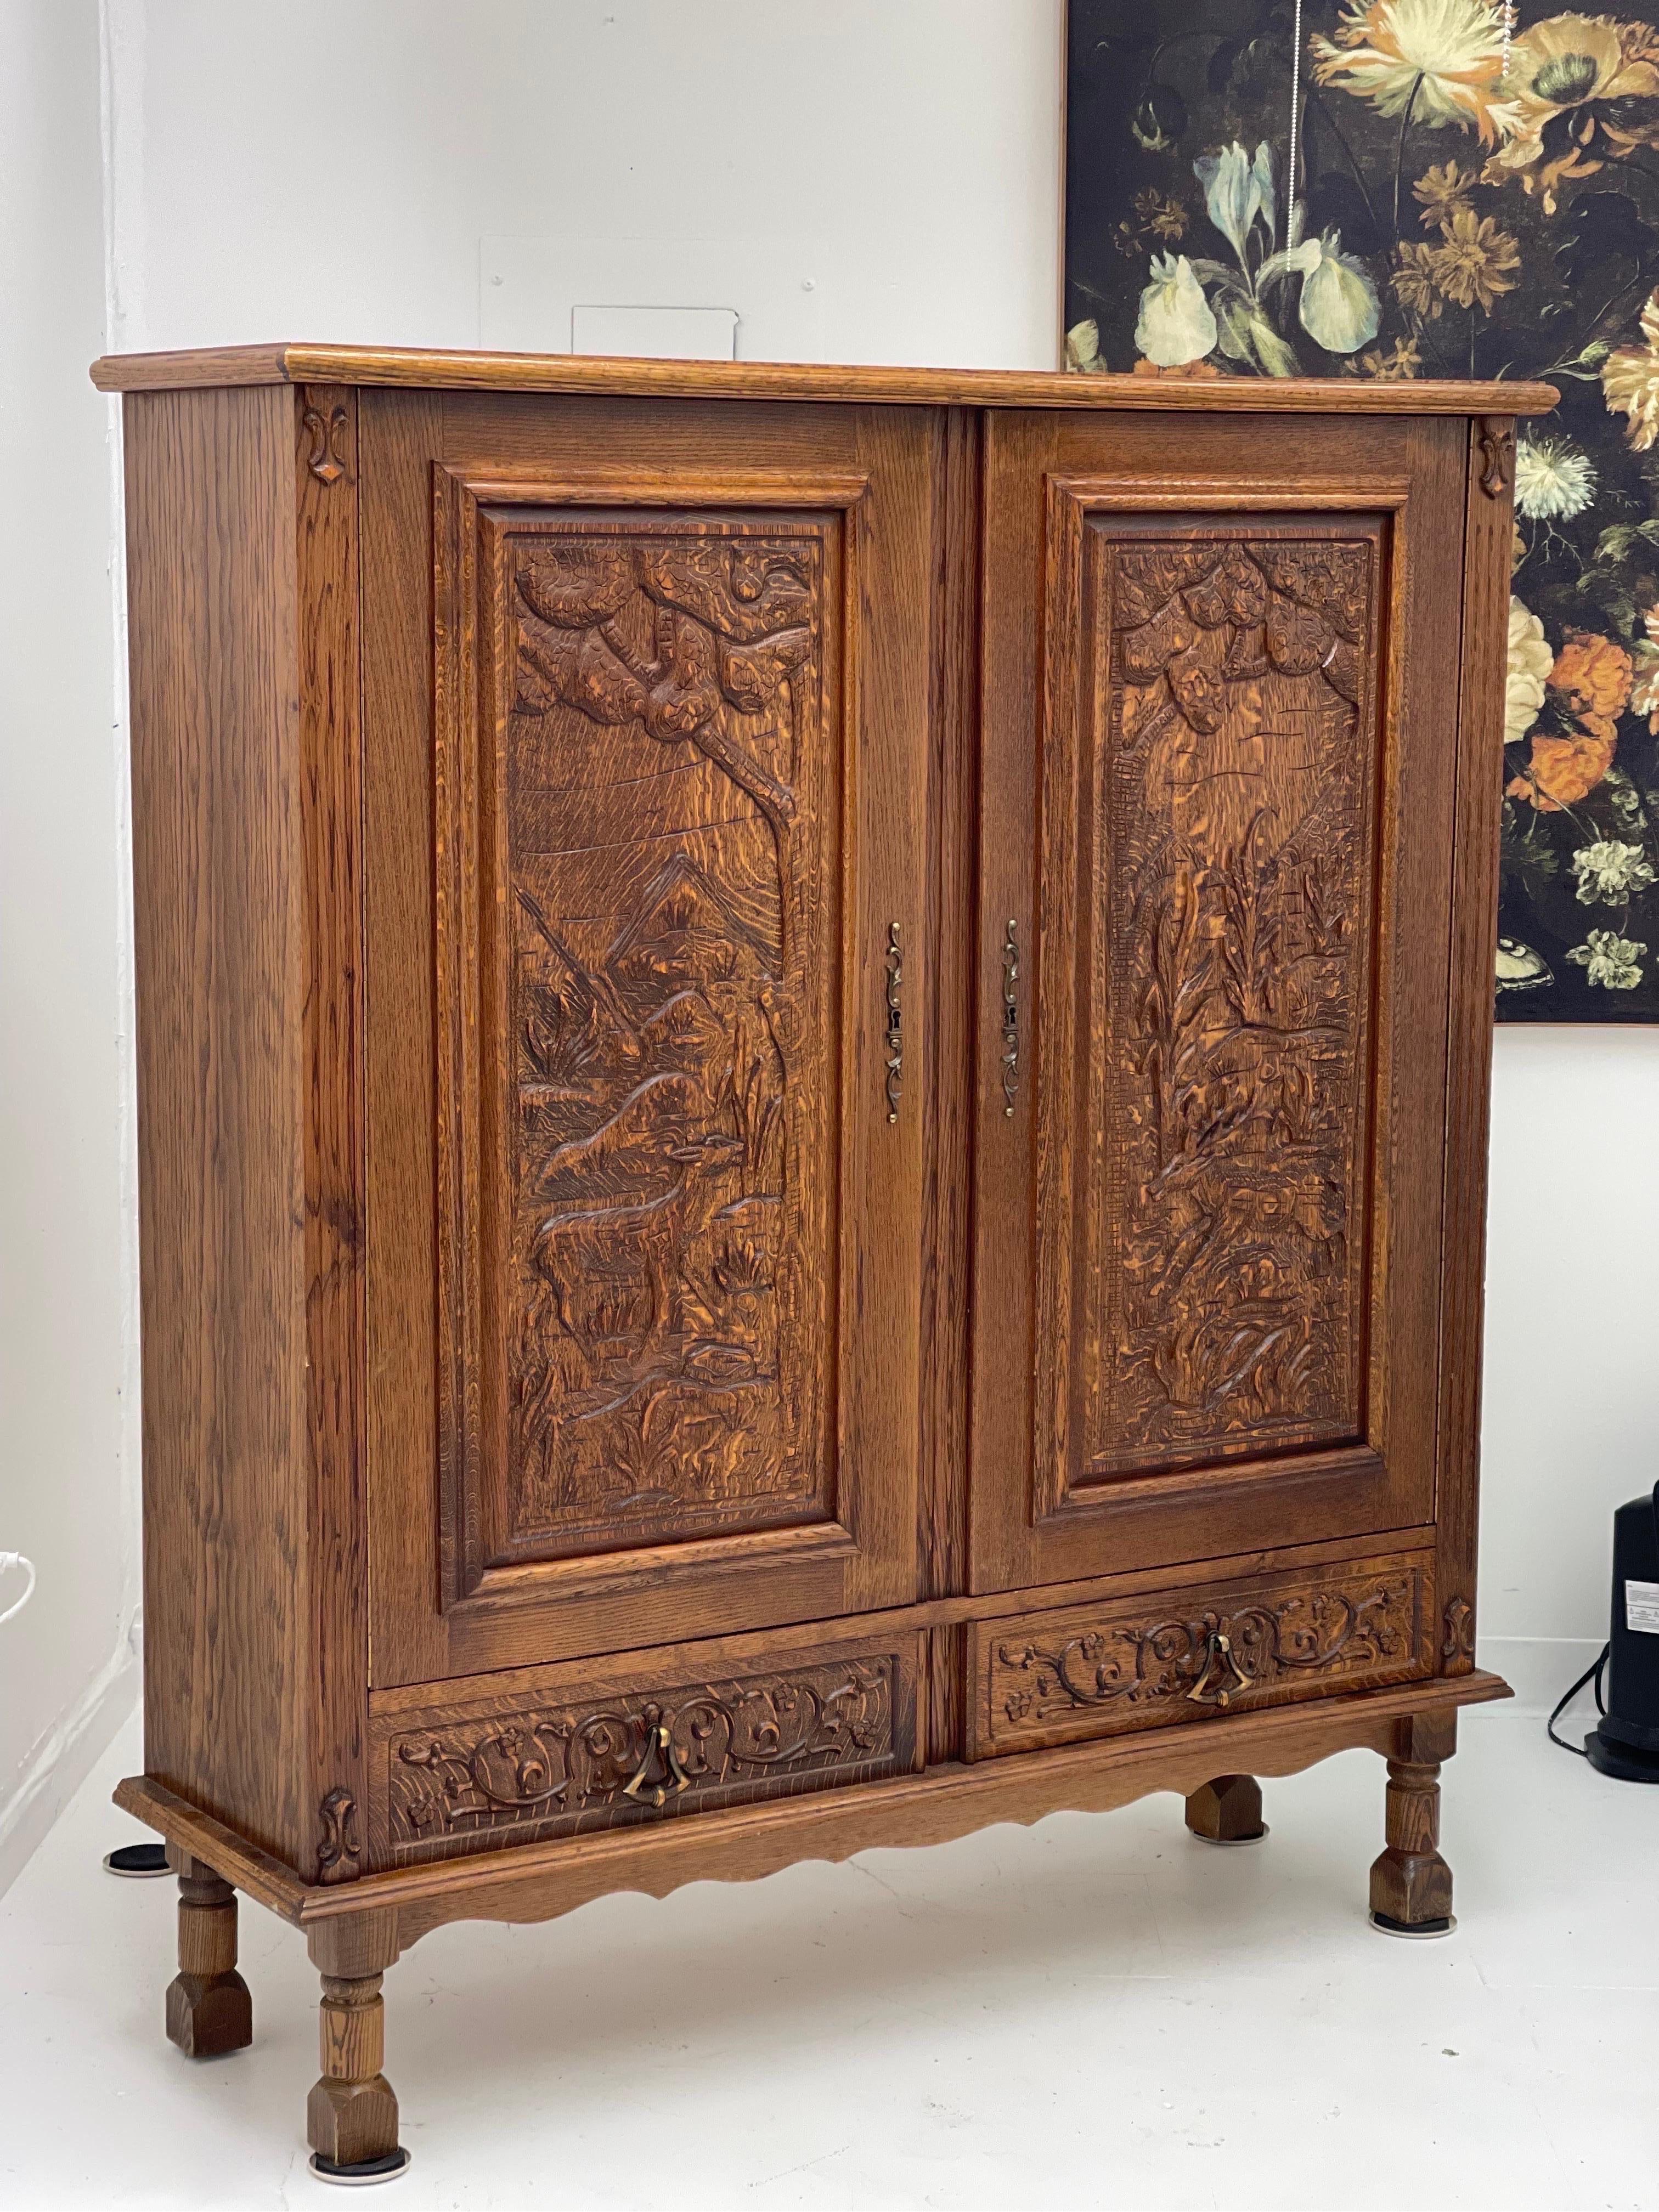 Mid-20th Century Vintage Cabinet from Germany with Hand Carved Motifs, circa 1930s For Sale